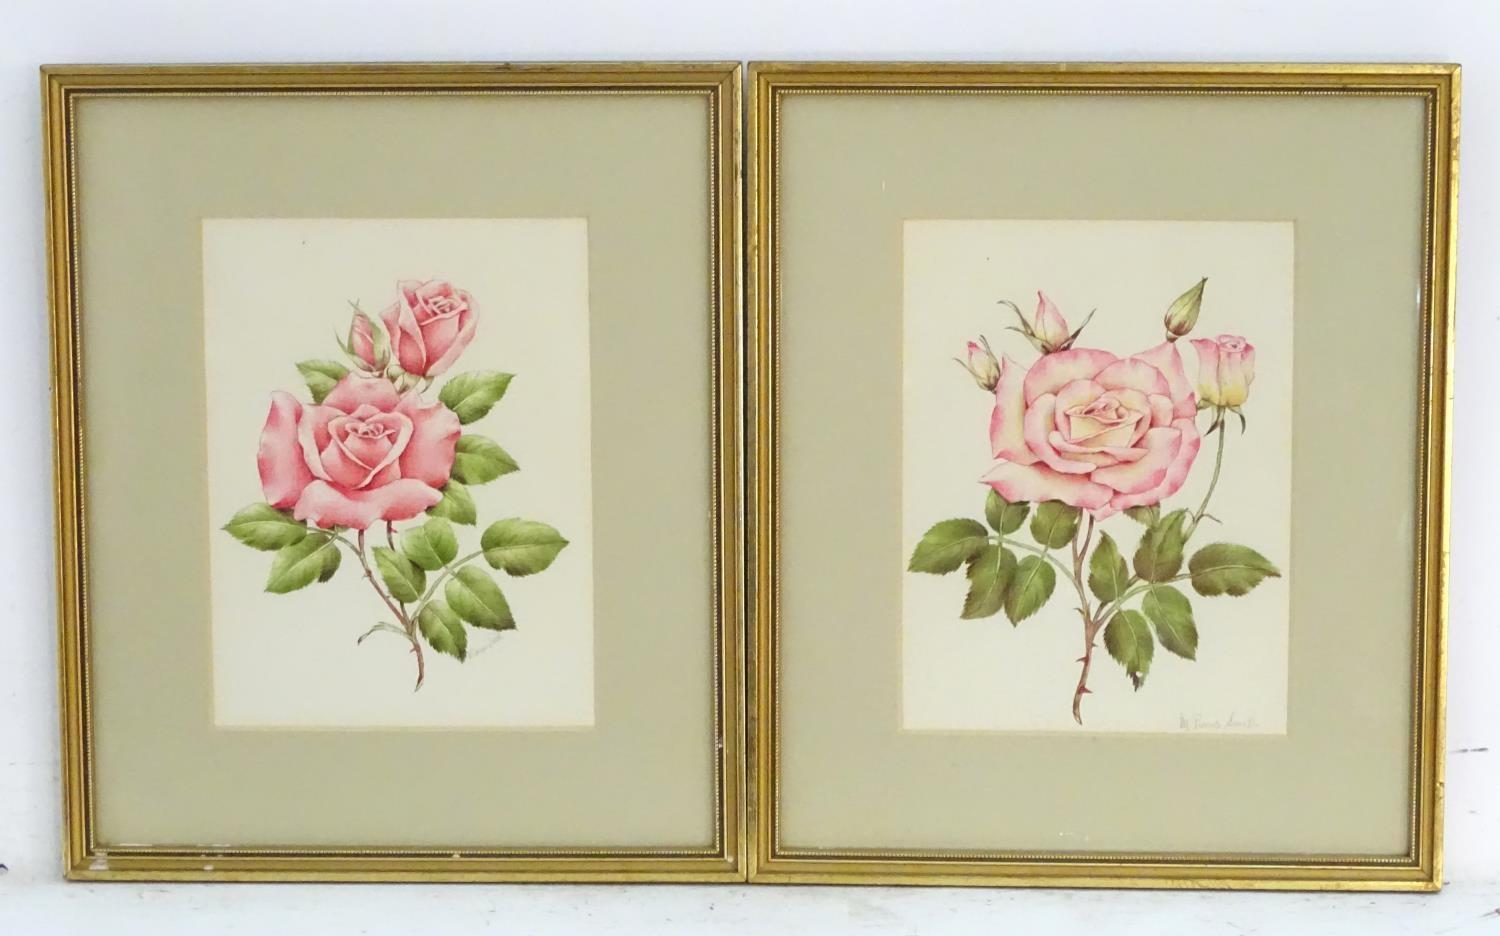 M. P. Smith, XX, English School, A pair of watercolours, Studies of roses, rosebuds and leaves. Both